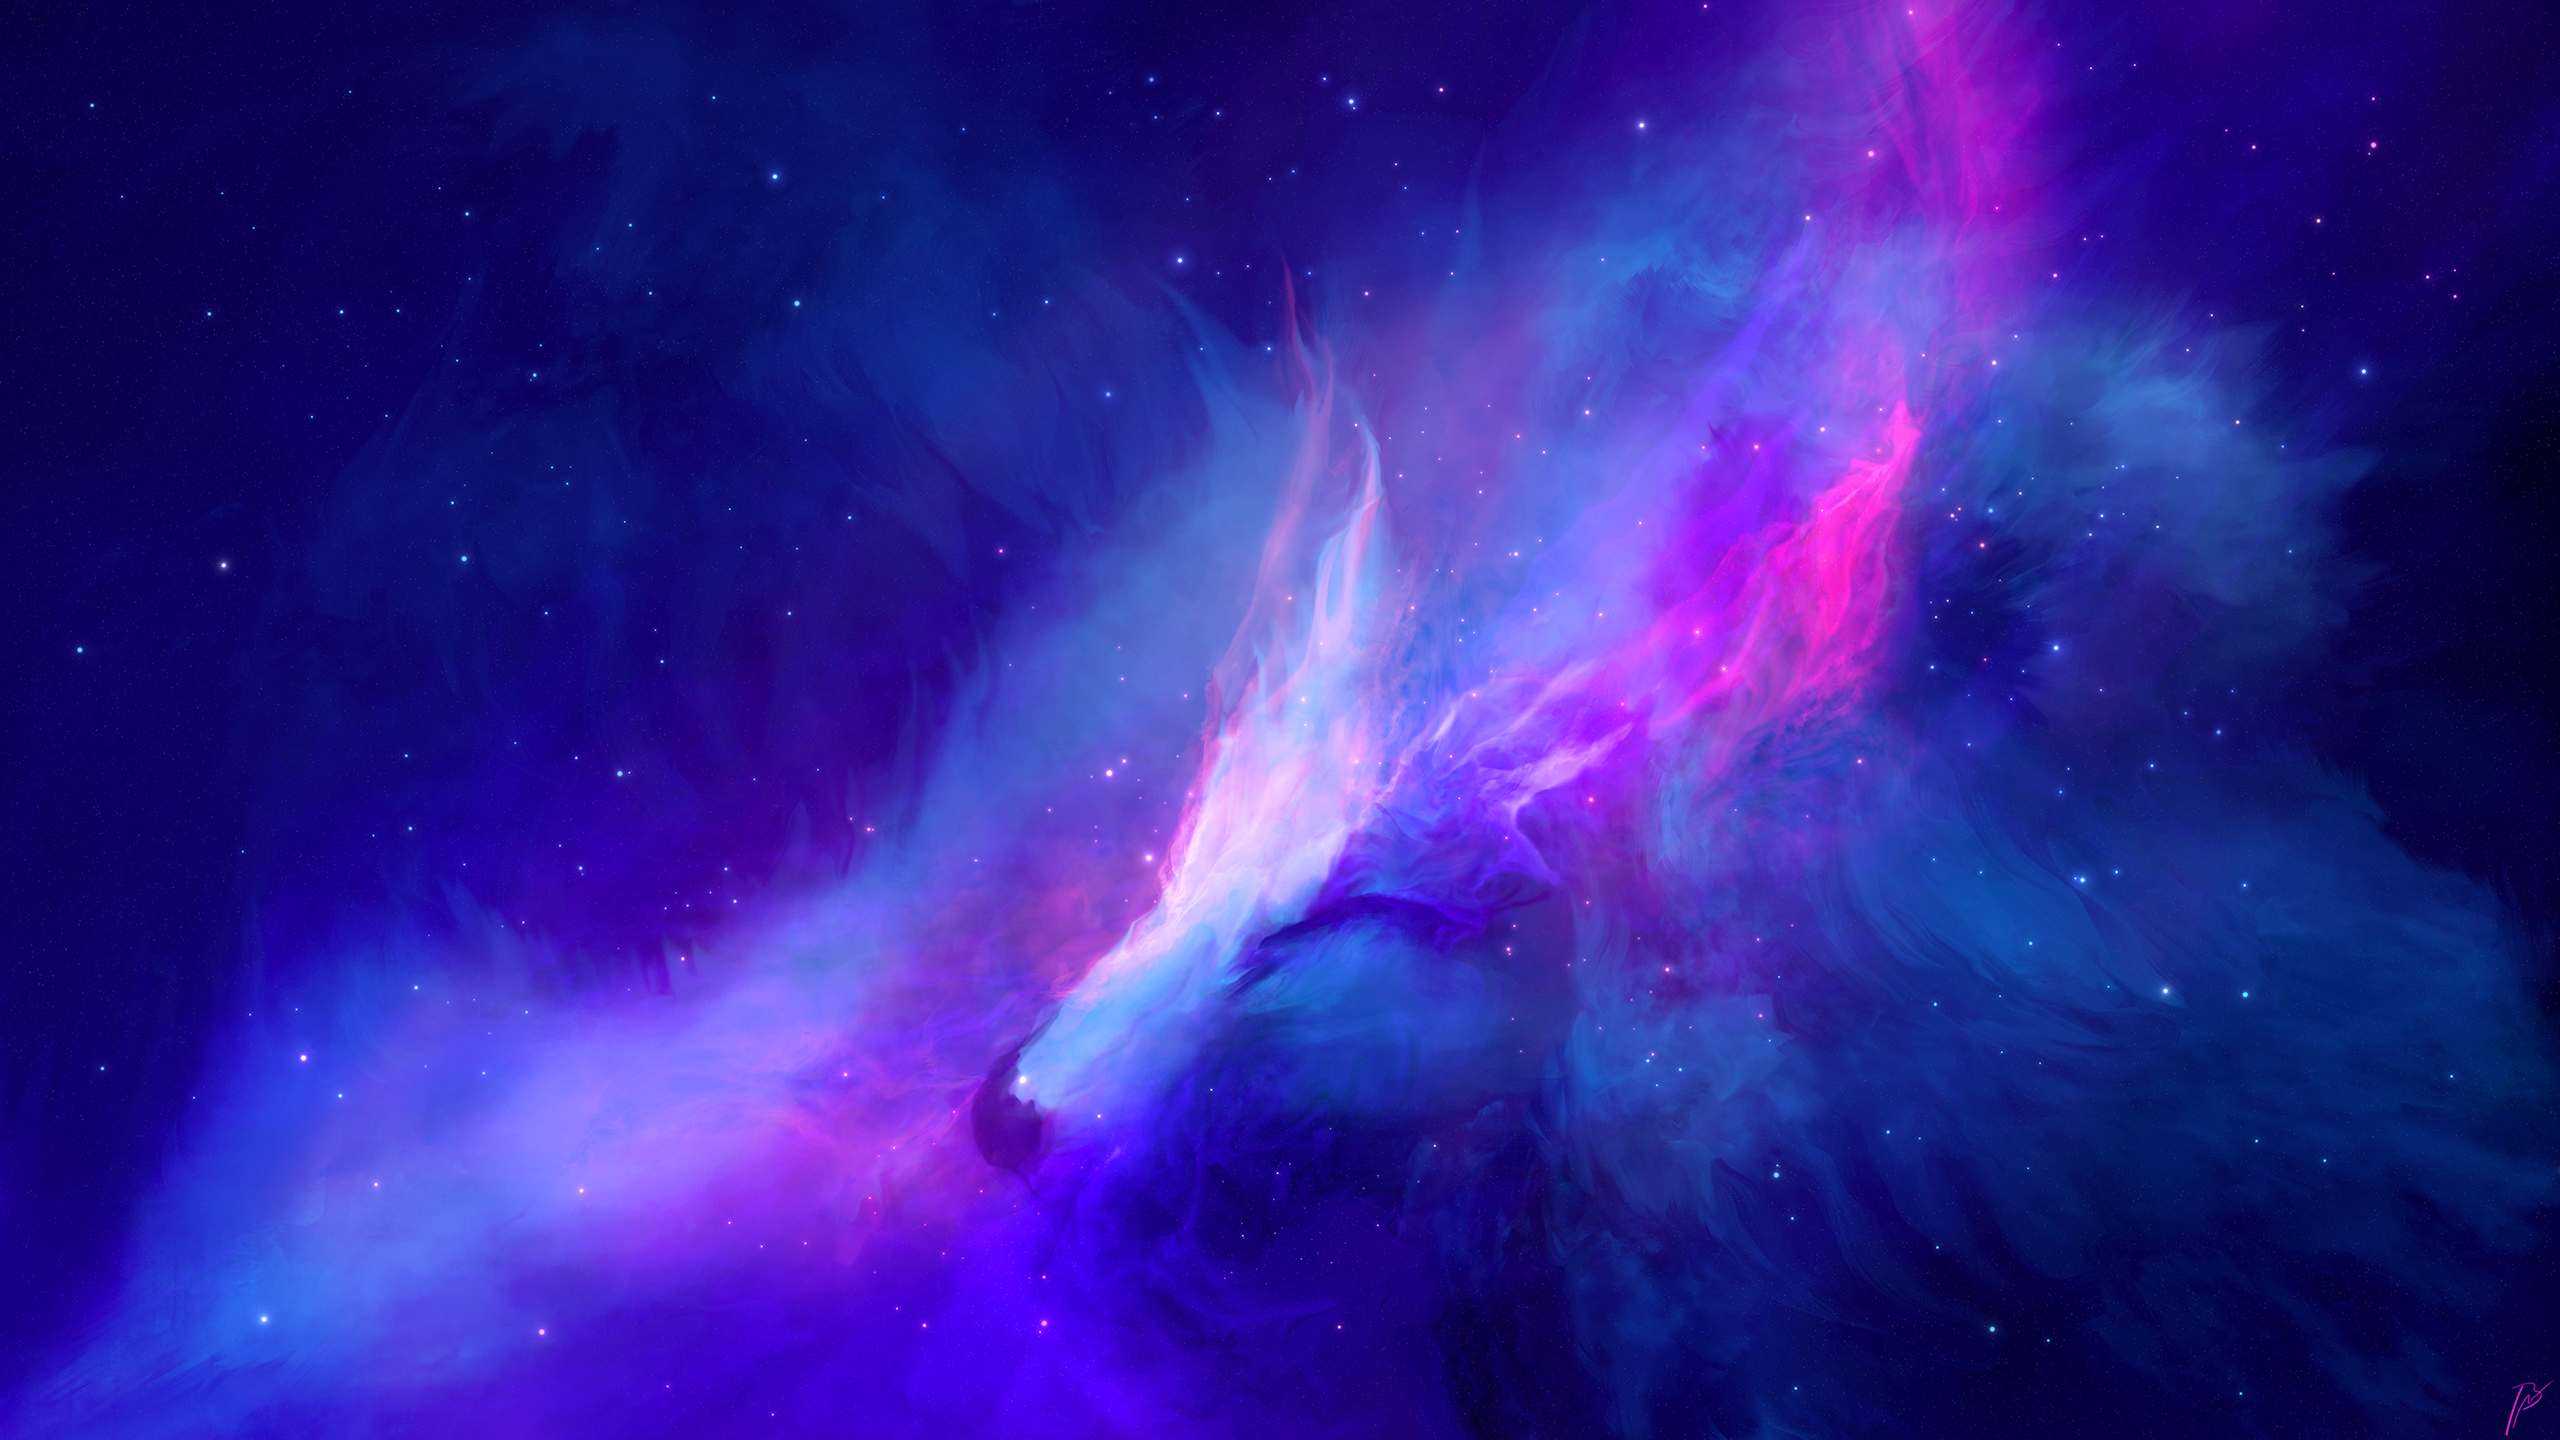 Nebula Space Art, HD Digital Universe, 4k Wallpaper, Image, Background, Photo and Picture